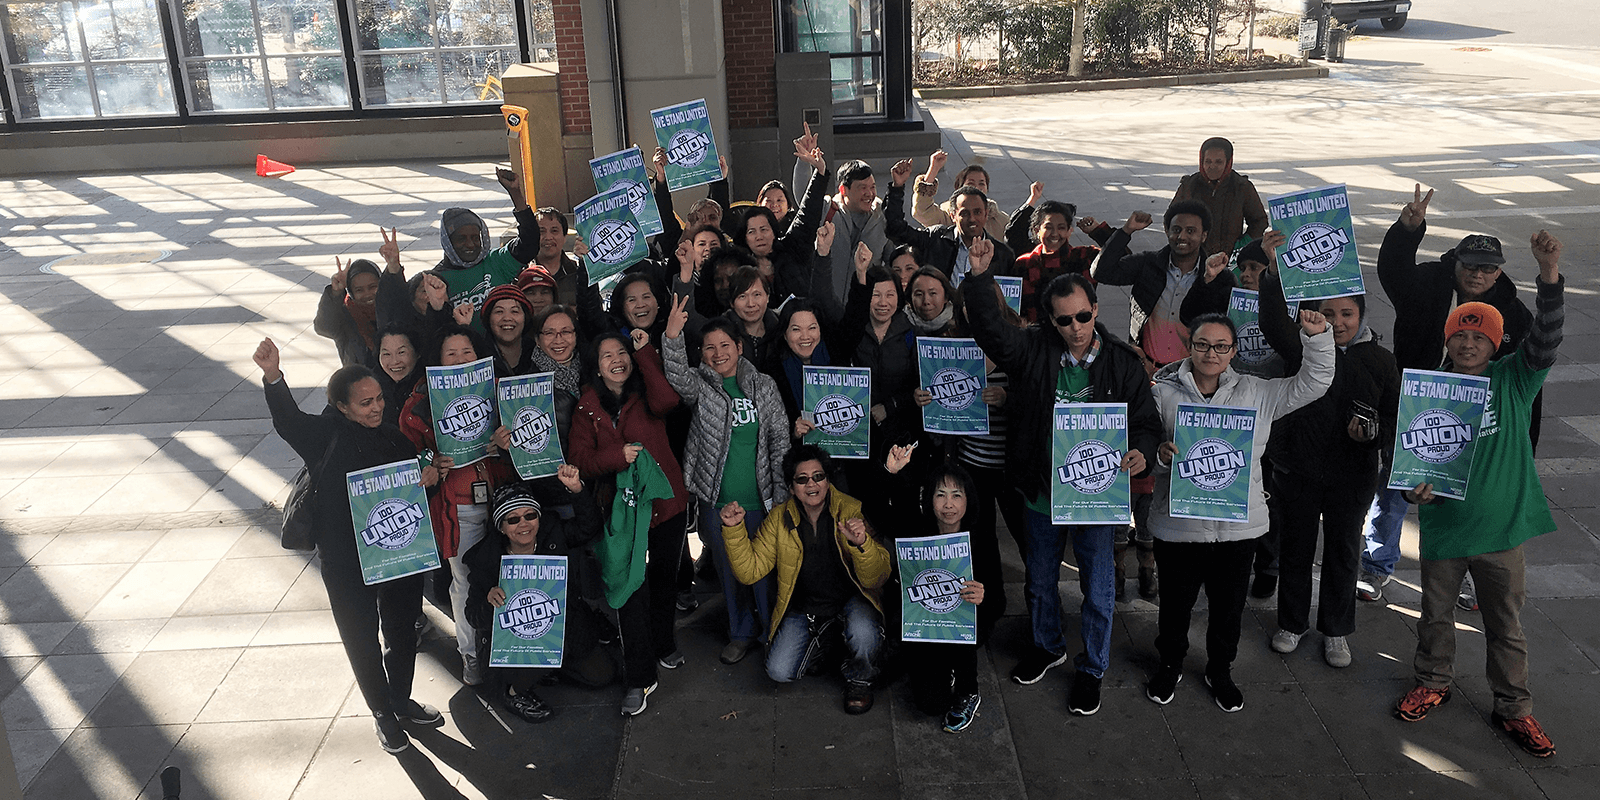 AFSCME Fights Outsourcing at the University of Washington